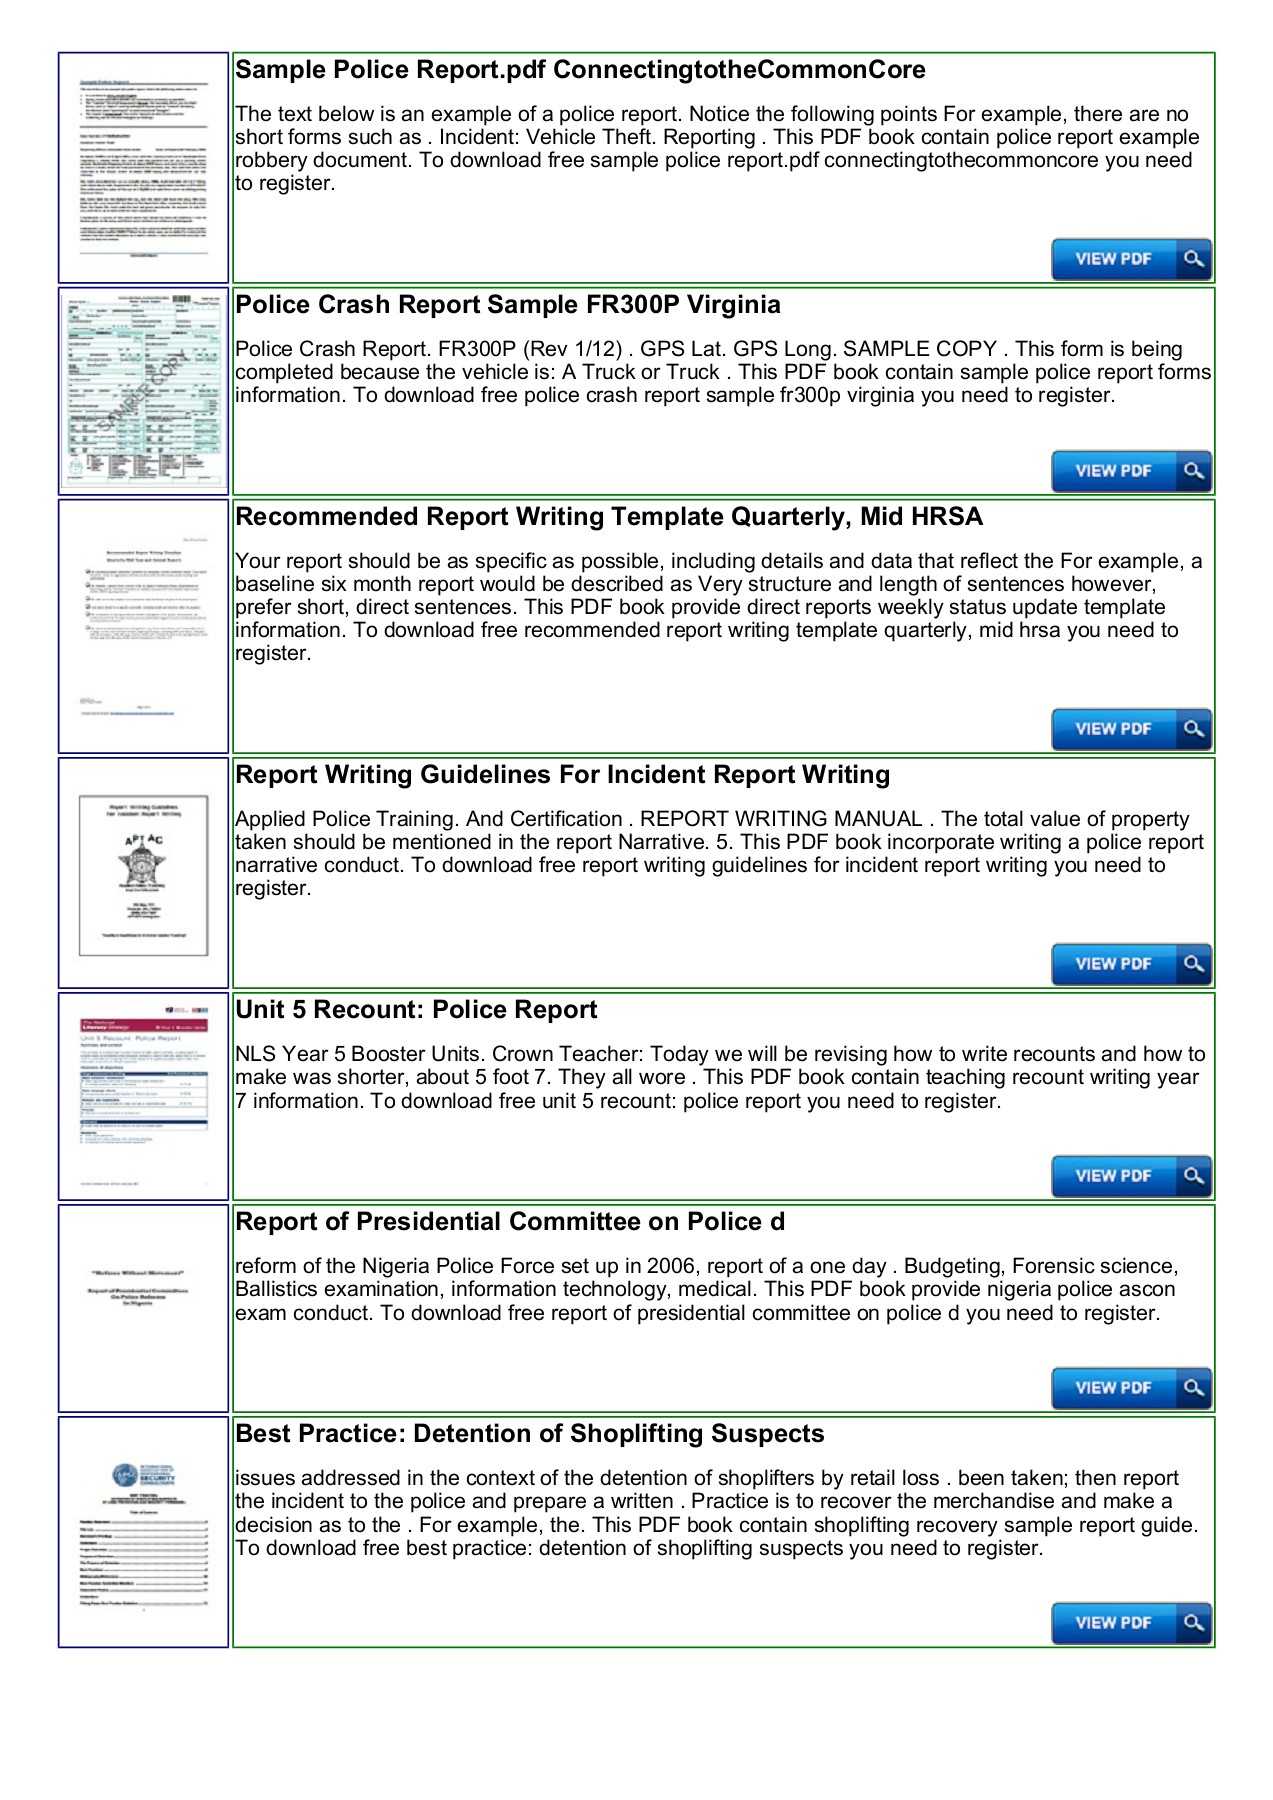 Police Shoplifting Report Writing Template Sample Pages 1 For Police Report Template Pdf